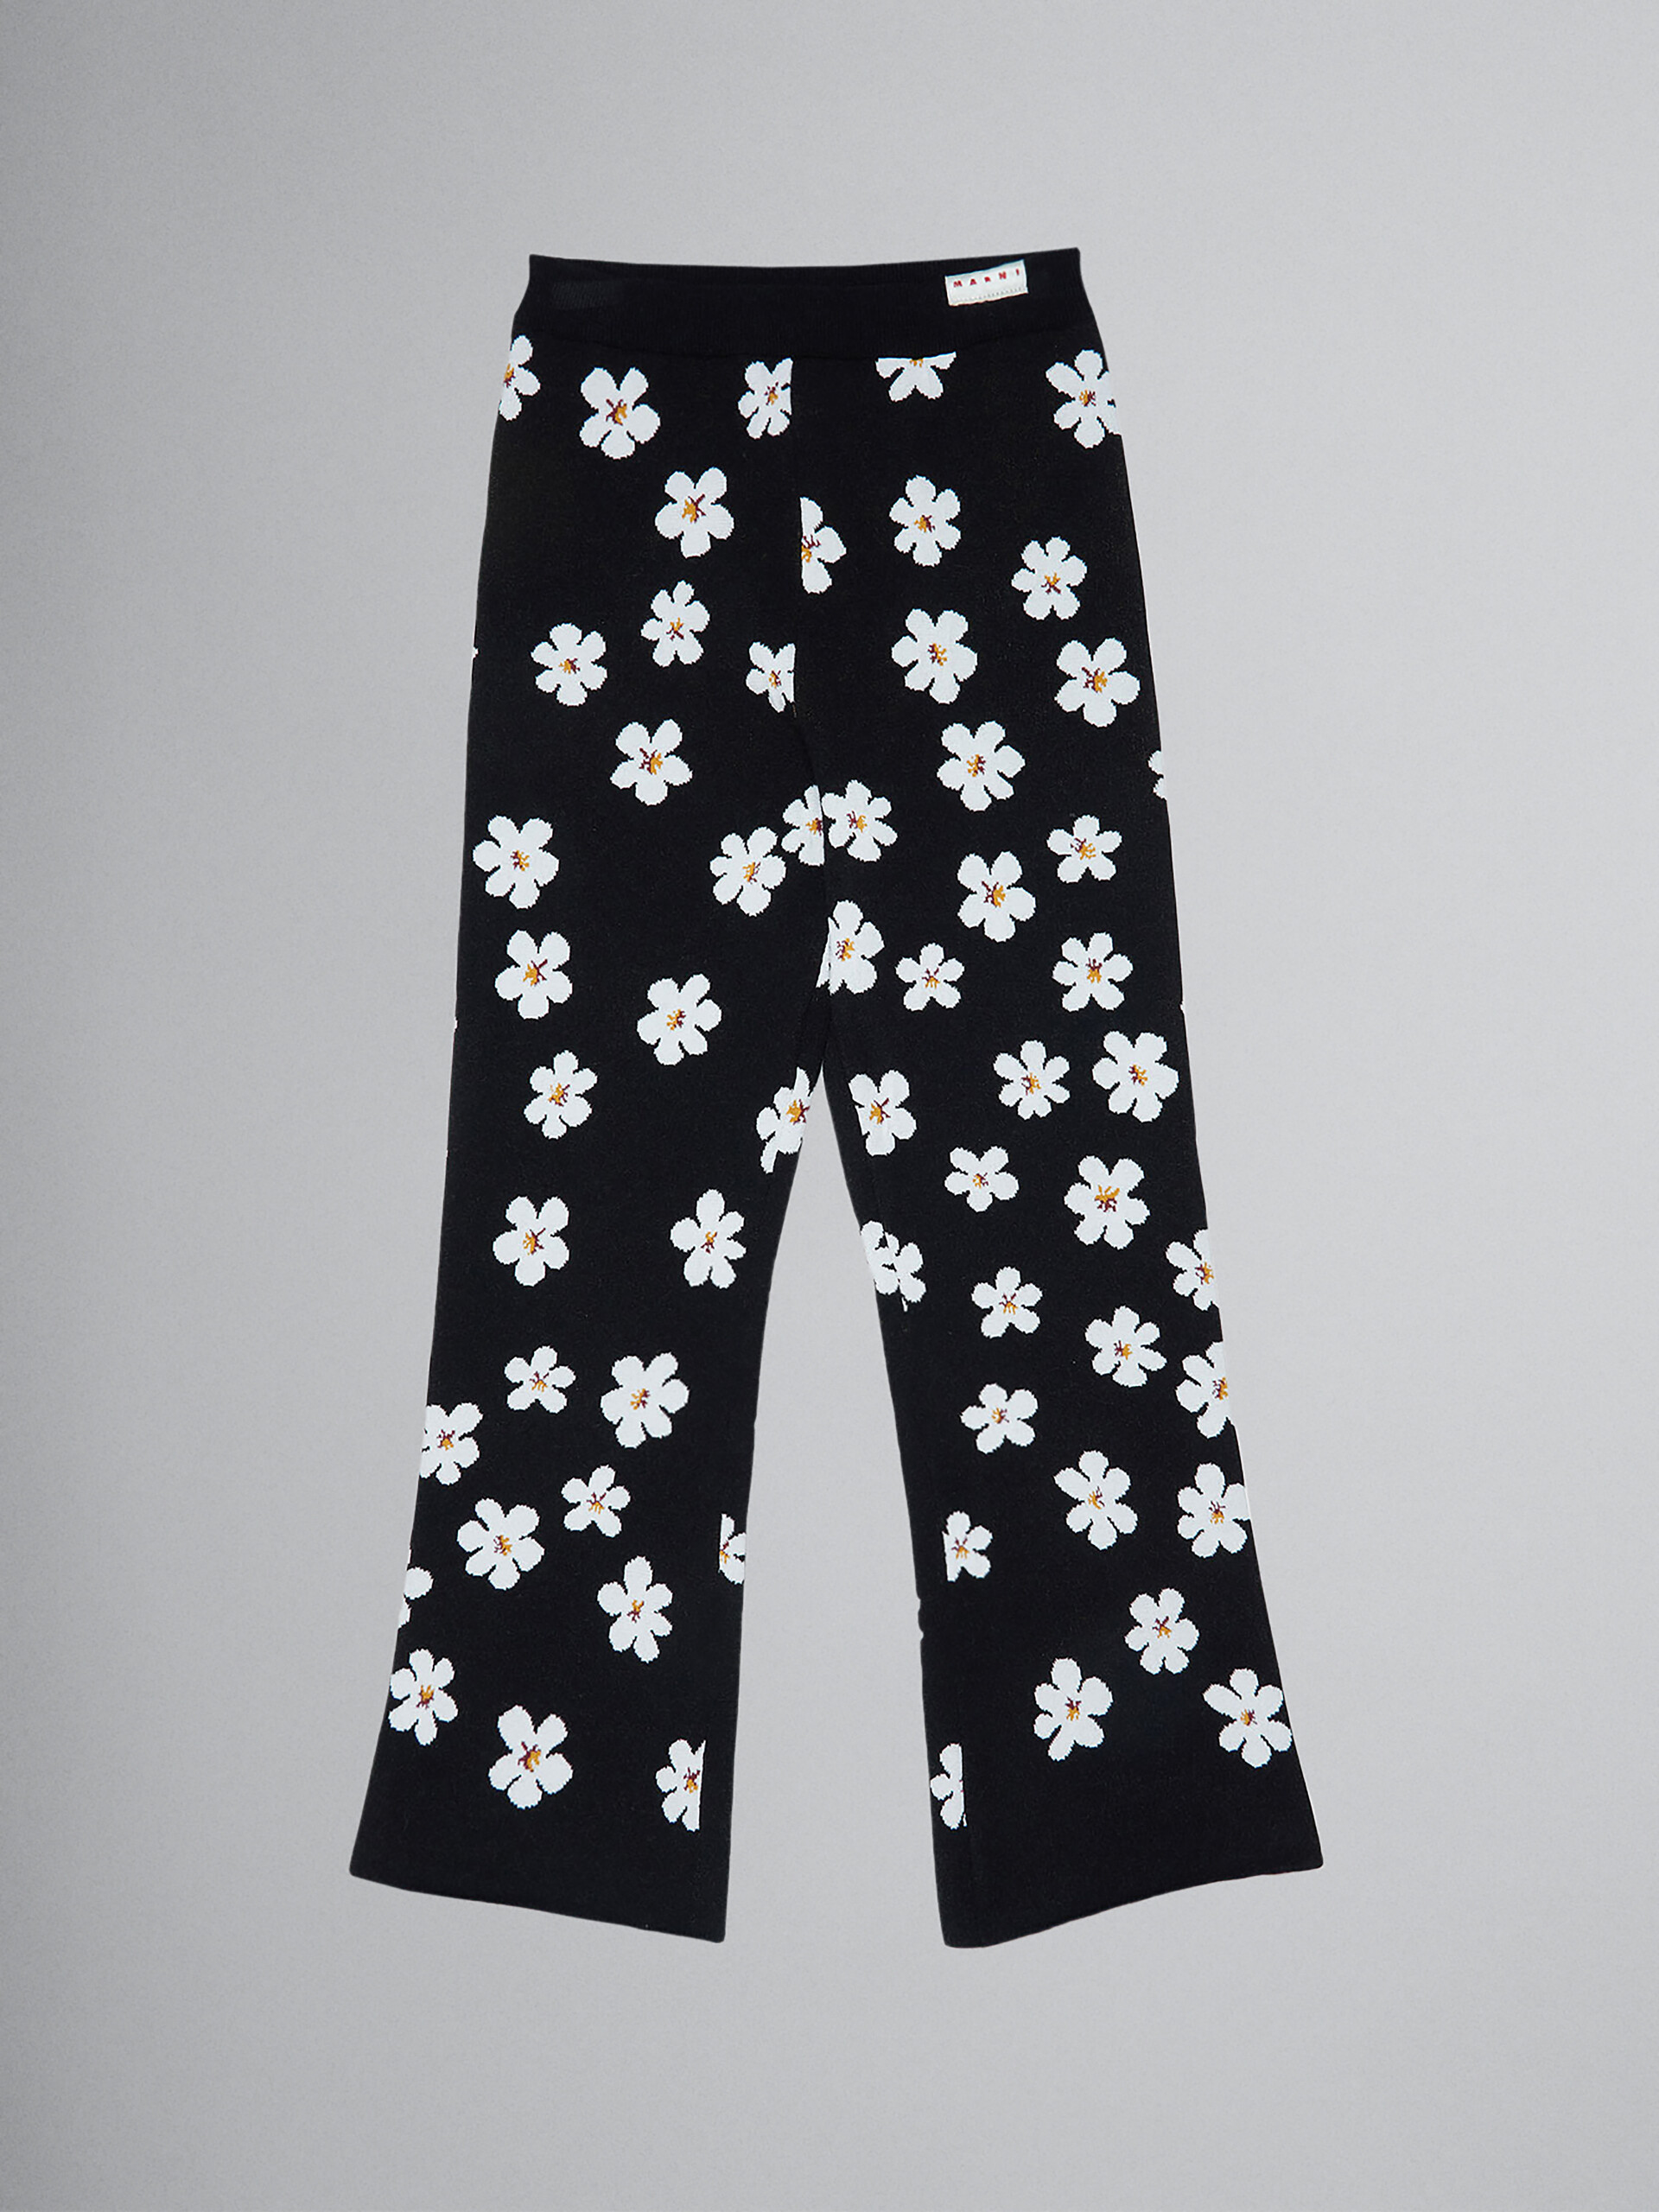 Black trousers with jacquard Daisy motif - Pants - Image 1